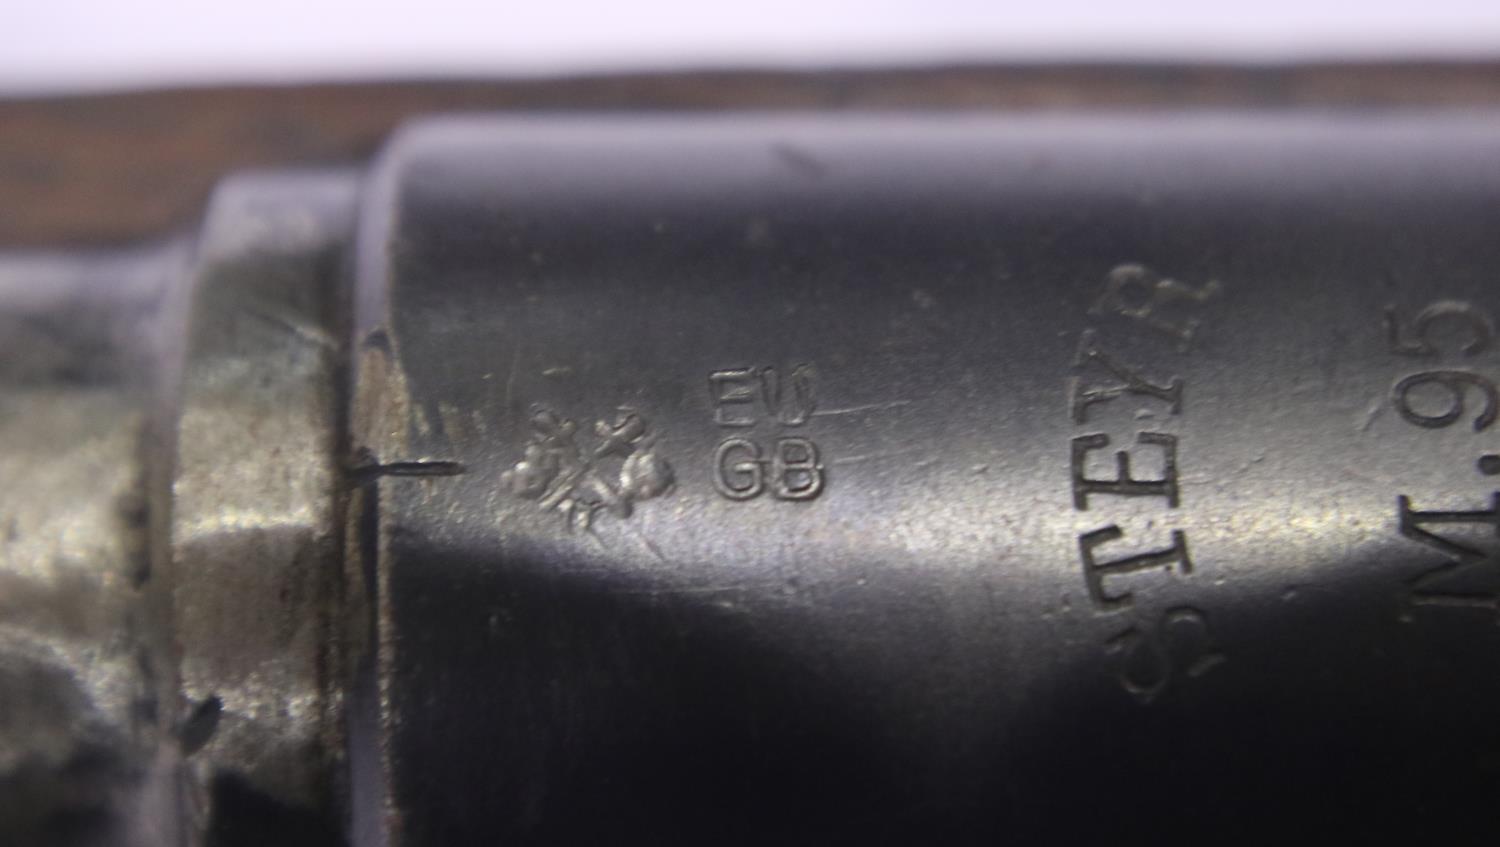 Steyr Mannlicher M95 straight pull service rifle, numbered 9953, deactivated to current EU - Image 5 of 8